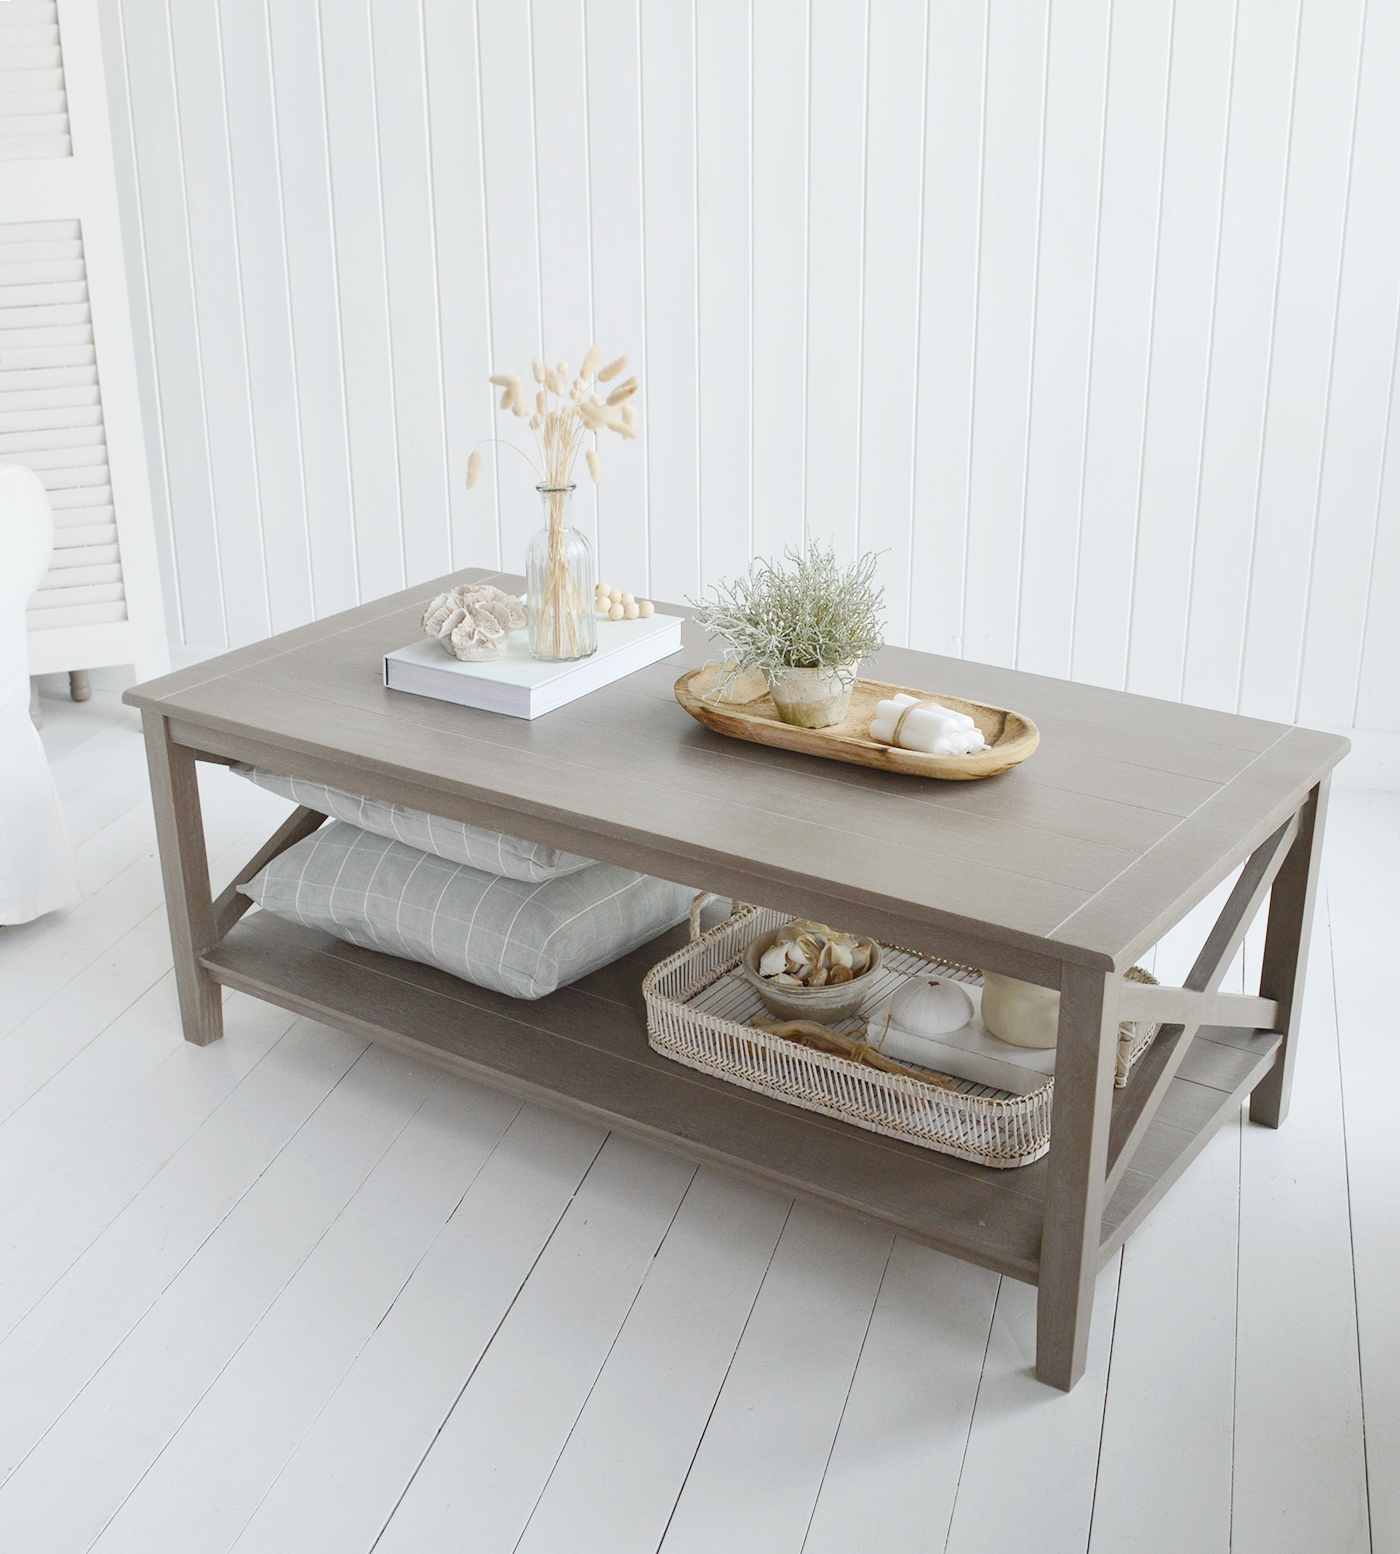 Cambridge Coffee Table in driftwood grey - New England Interiors Furniture for Coastal, Modern Farmhouse and Country Homes